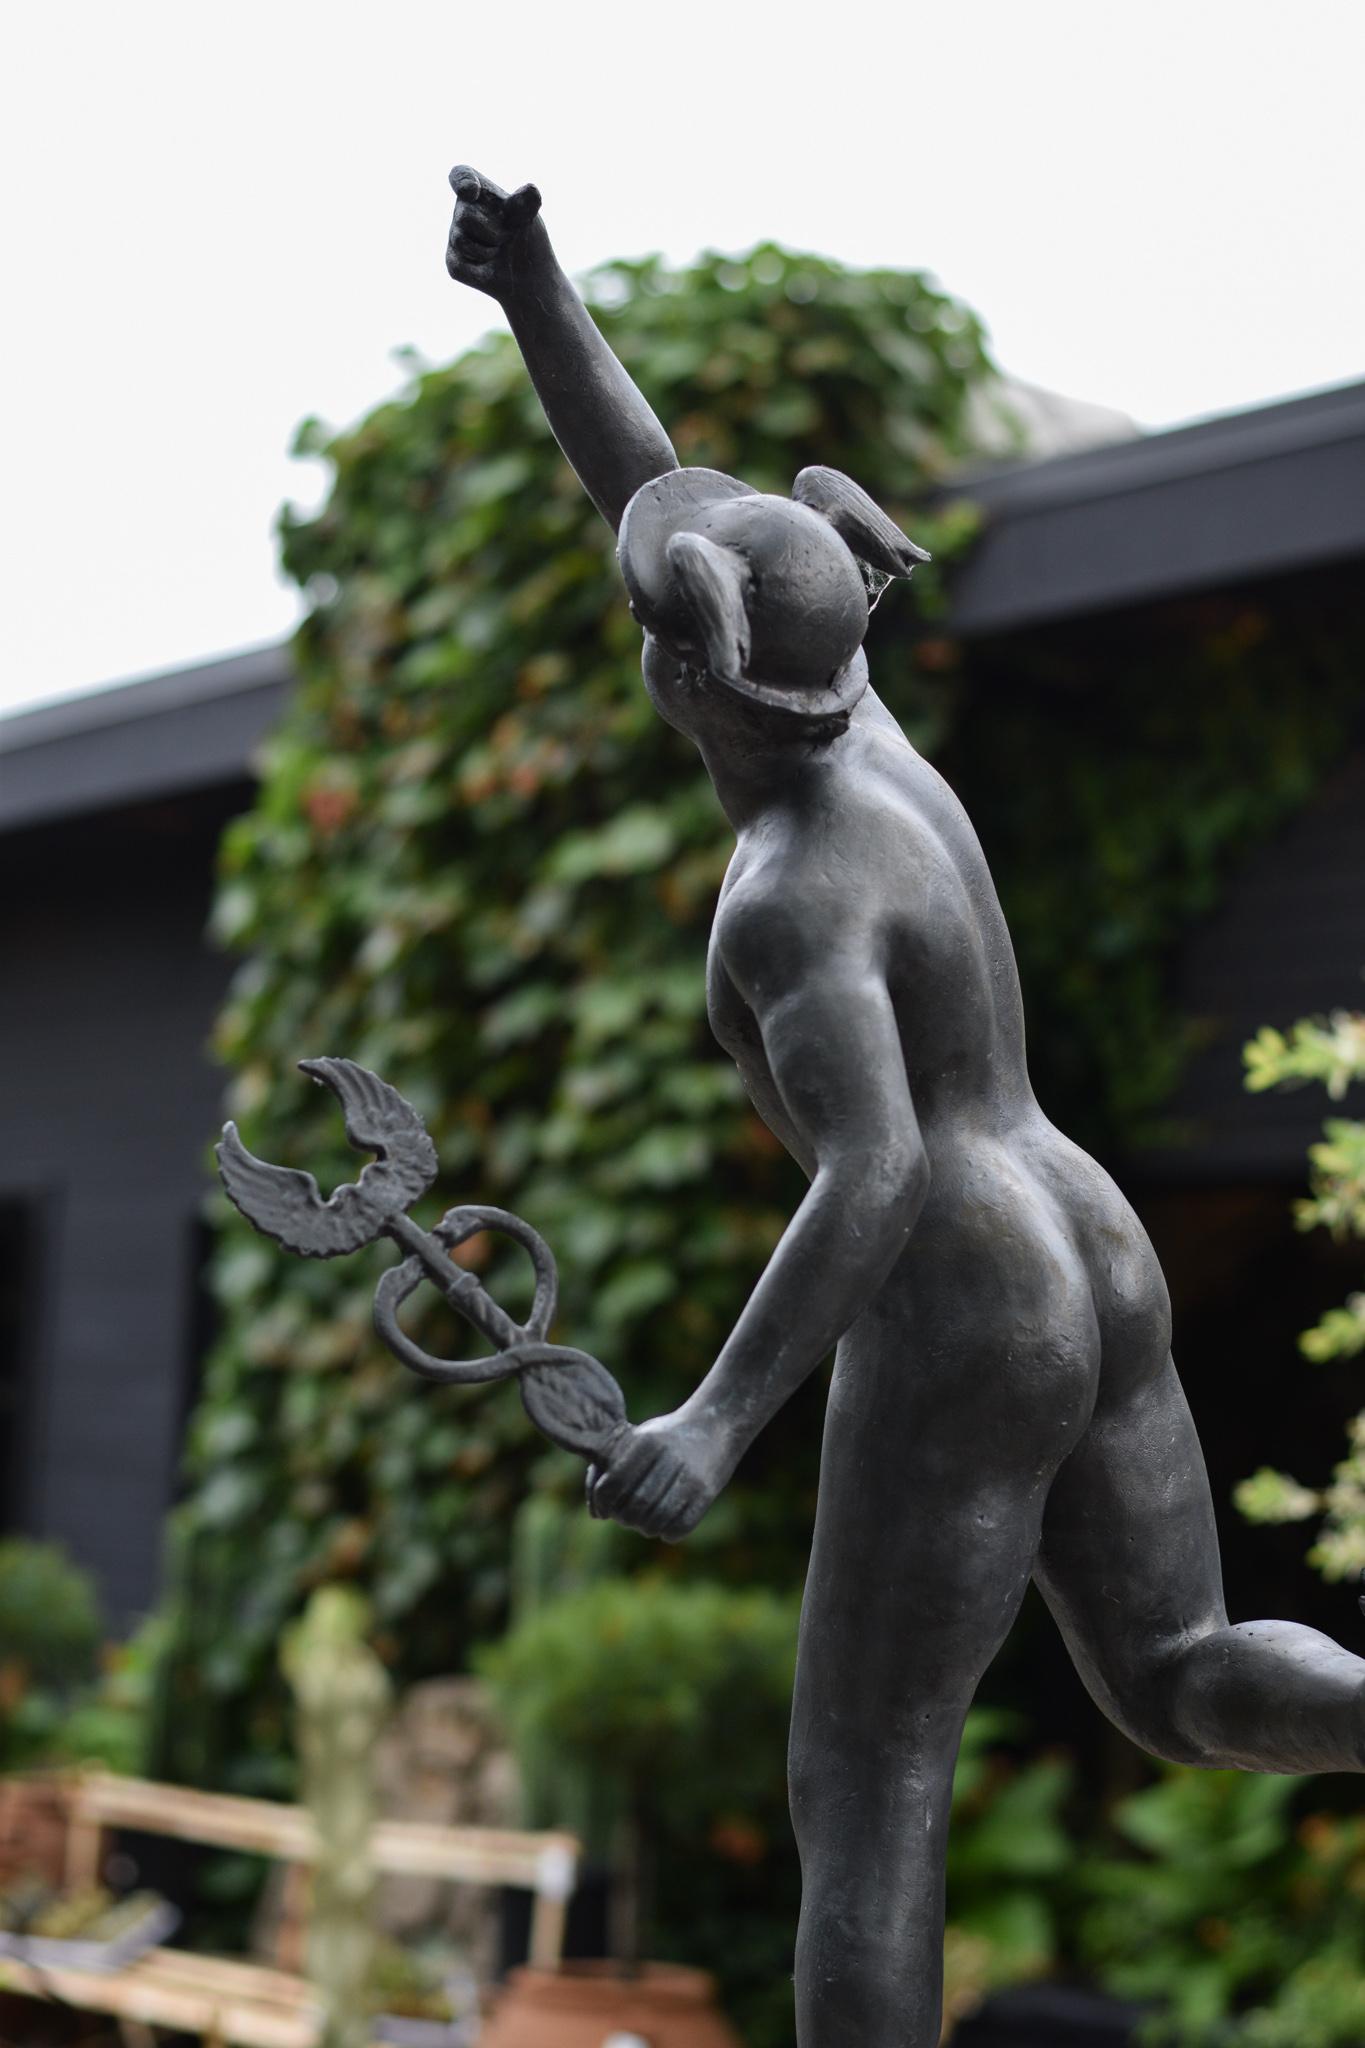 A modern take on a classic artform, Stephen Markham’s techniques transcends the time-honored craft of lead work into a contemporary landscape.
This classical figure features a stately interpretation of the Greek god Hermes, entirely cast in British